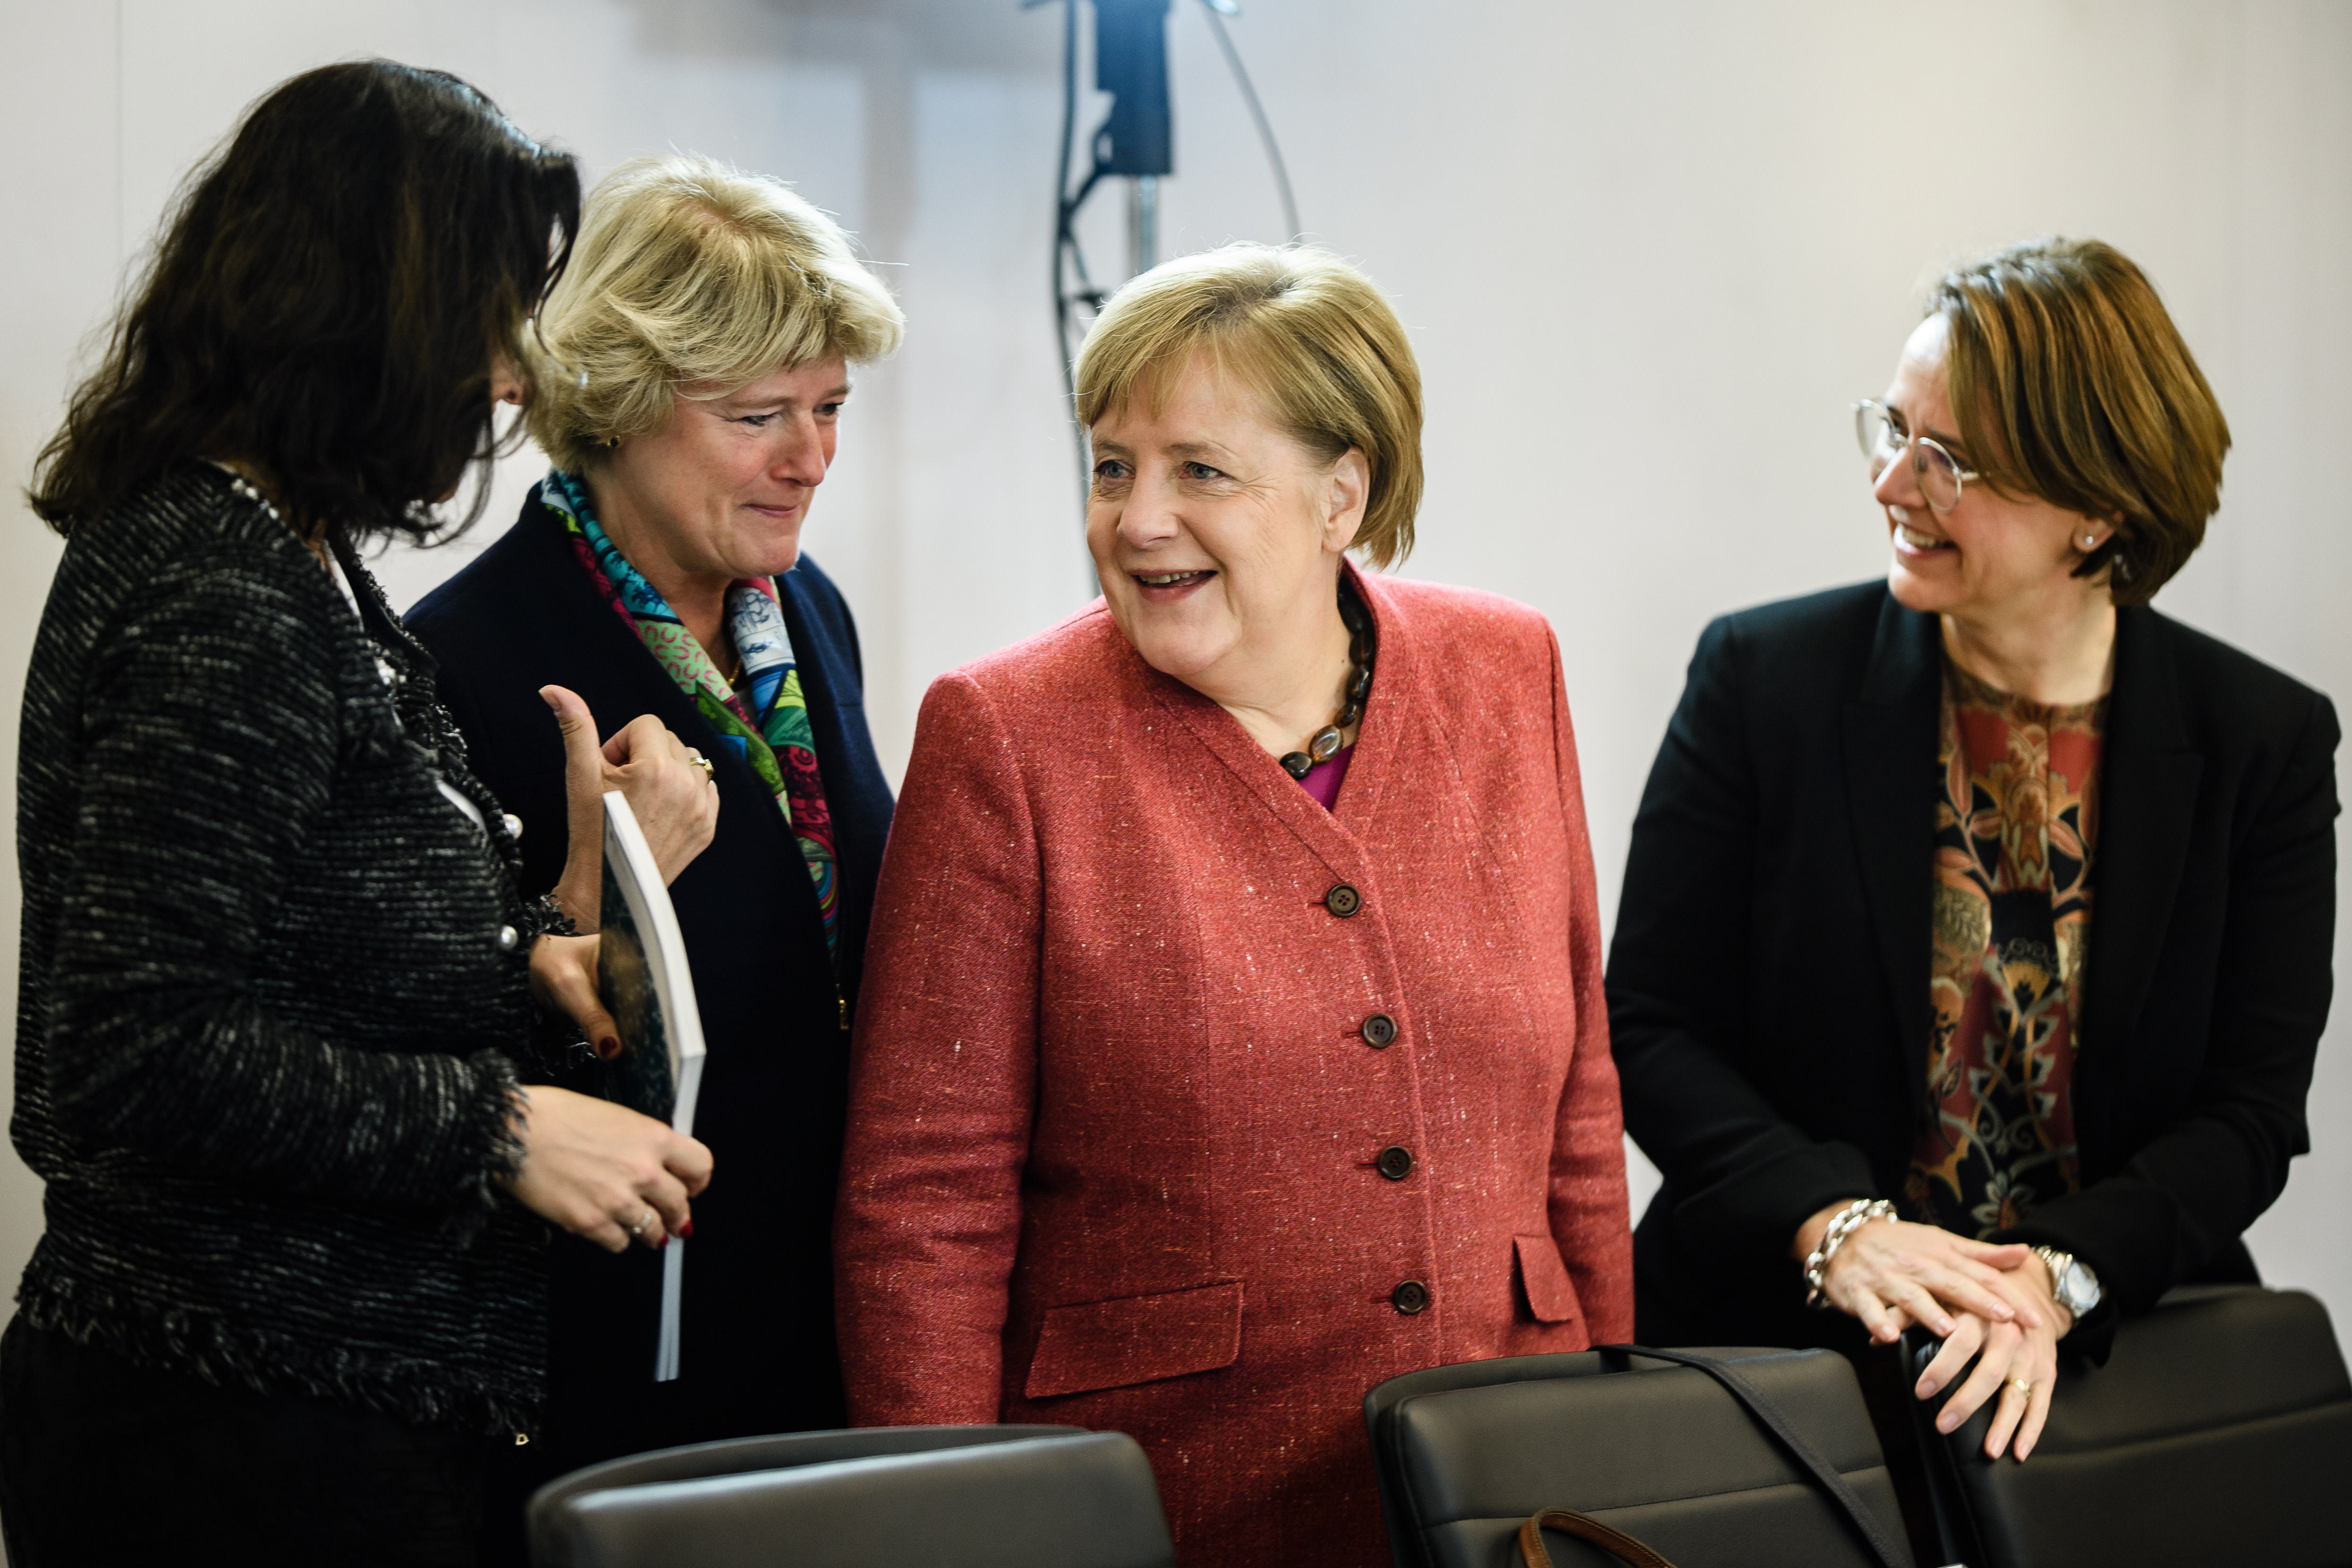 epa07166561 (L-R) State secretary for Digitalization Dorothee Baer, German State Culture Minister Monika Gruetters, German Chancellor Angela Merkel and German State Secretary for Migration, Refugees and Integration Annette Widmann-Mauz talk during a Cabinet meeting on digitization at the Hasso Plattner Institute in Potsdam, Germany, 15 November 2018. The German cabinet will discuss with IT specialists the artificial intelligence and the user data protection among others. The Hasso Plattner Institute is a privately funded IT institute and faculty of the University of Potsdam.  EPA/CLEMENS BILAN